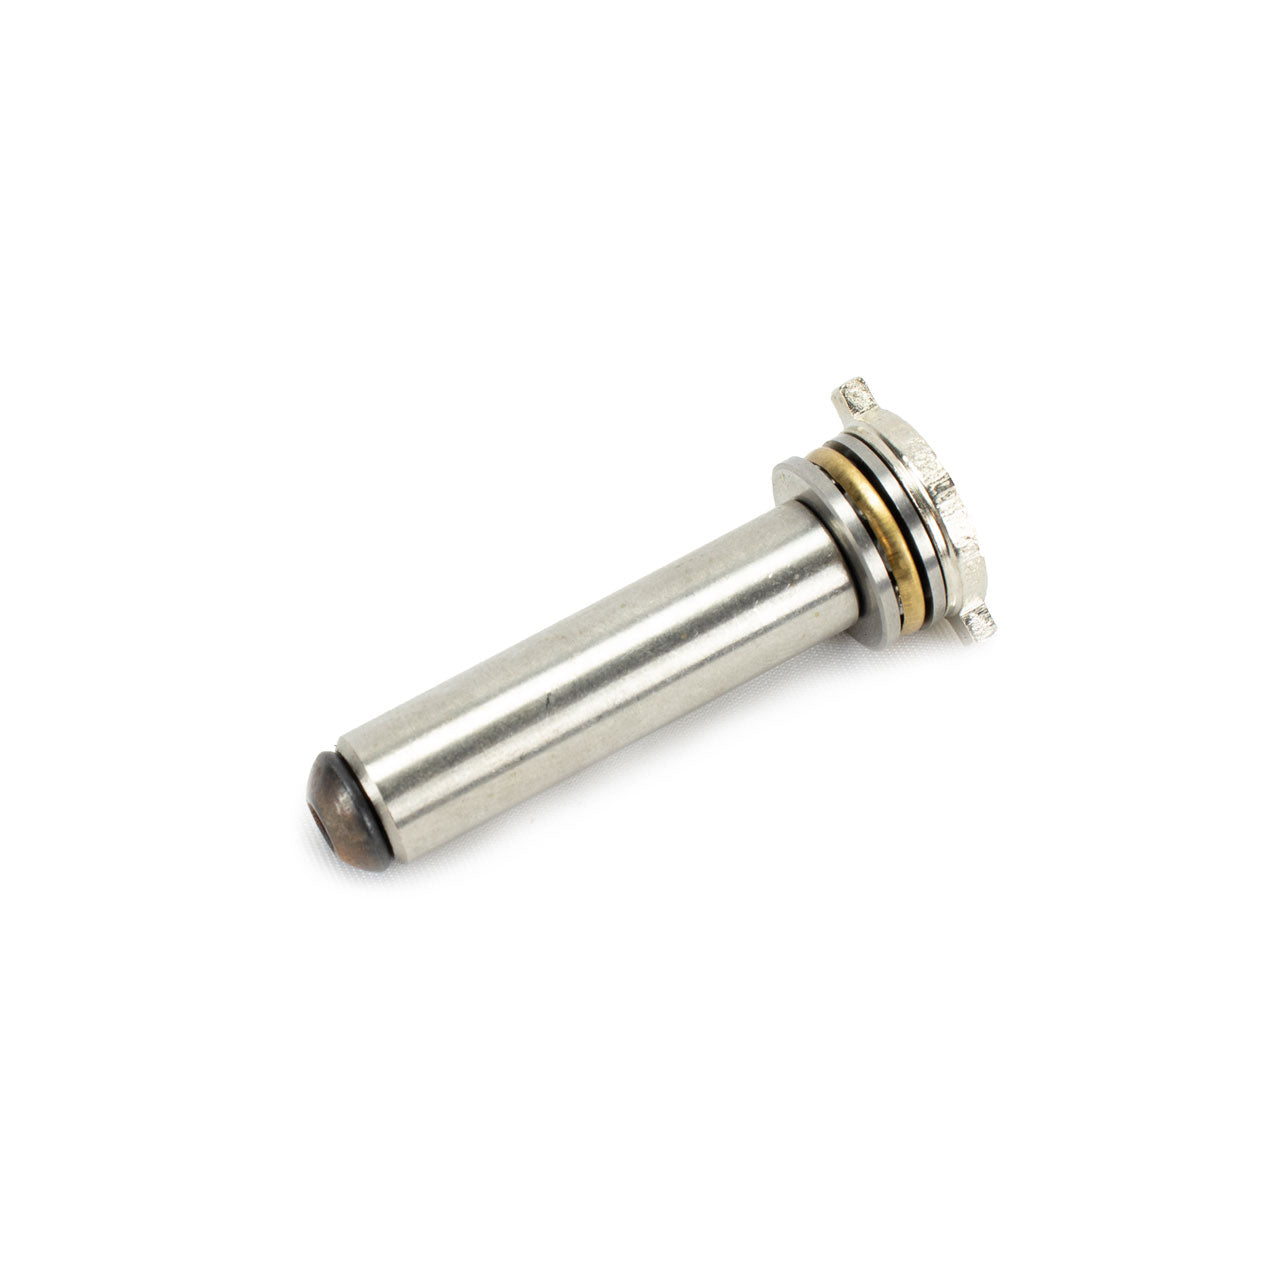 Rocket Airsoft Ver. 2 Stainless Steel Spring Guide V2